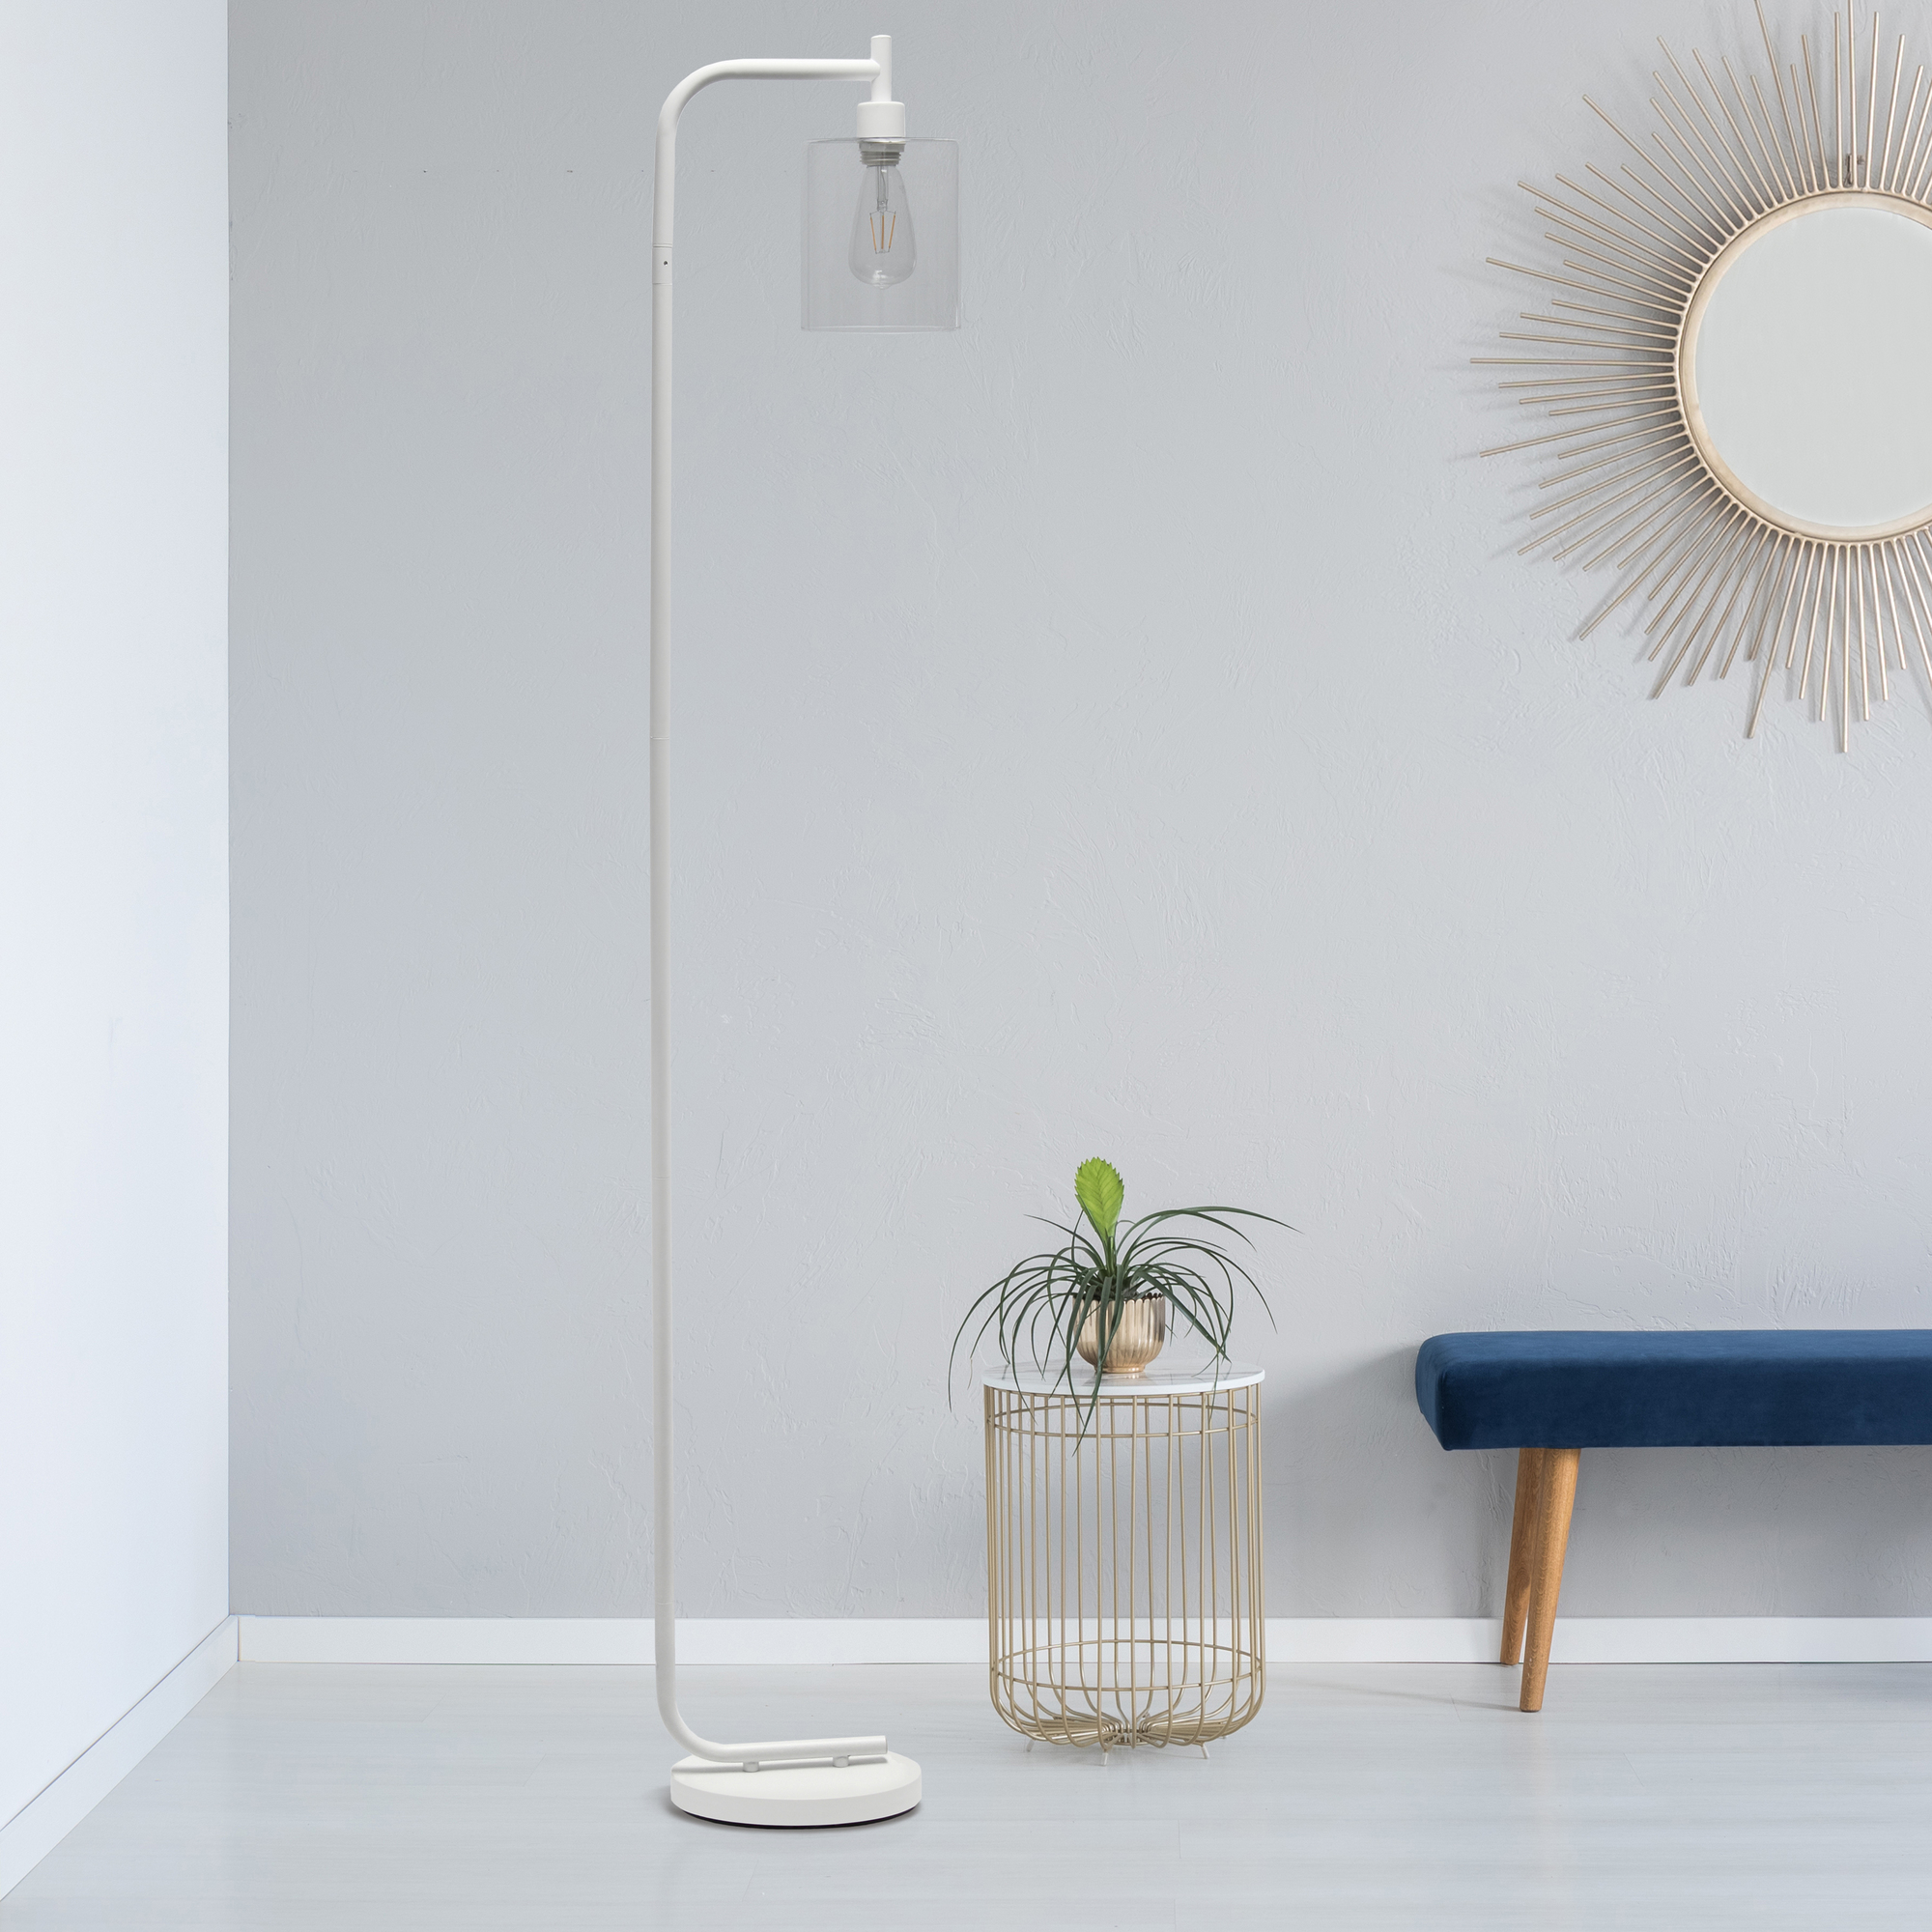 OttLite - LED Floor Lamp with USB and Tablet Stand